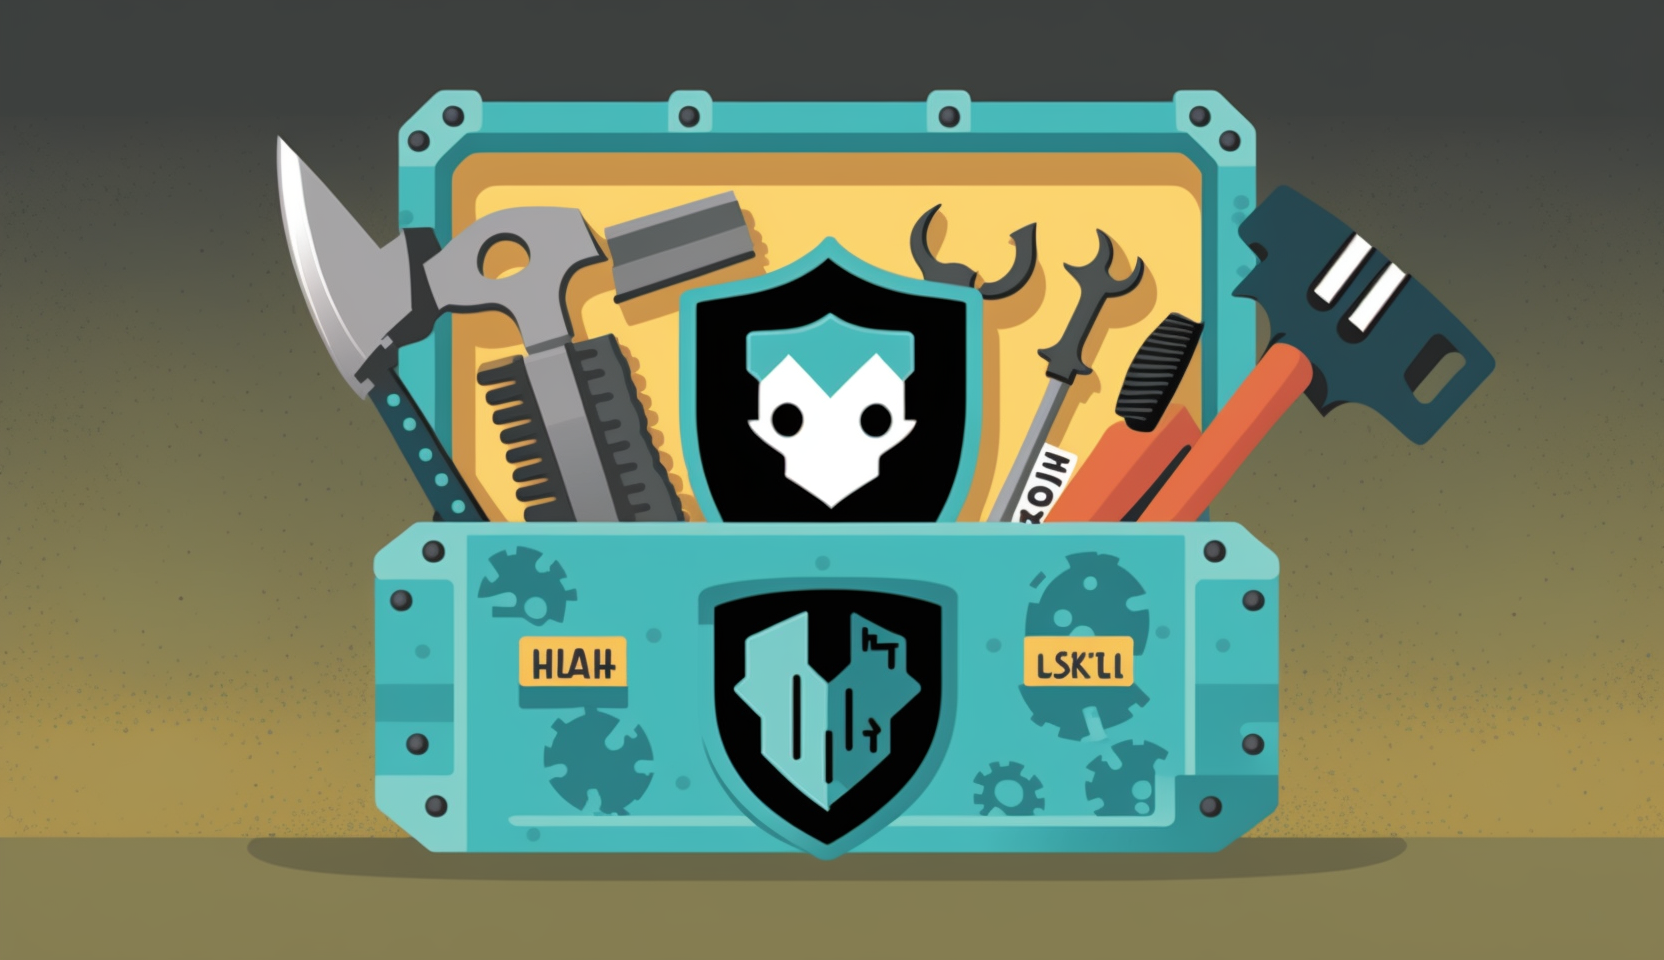 A cartoon-style image of a toolbox with open source logos on each tool, along with a shield with a lock in the center to represent cybersecurity, all on a background with binary code.